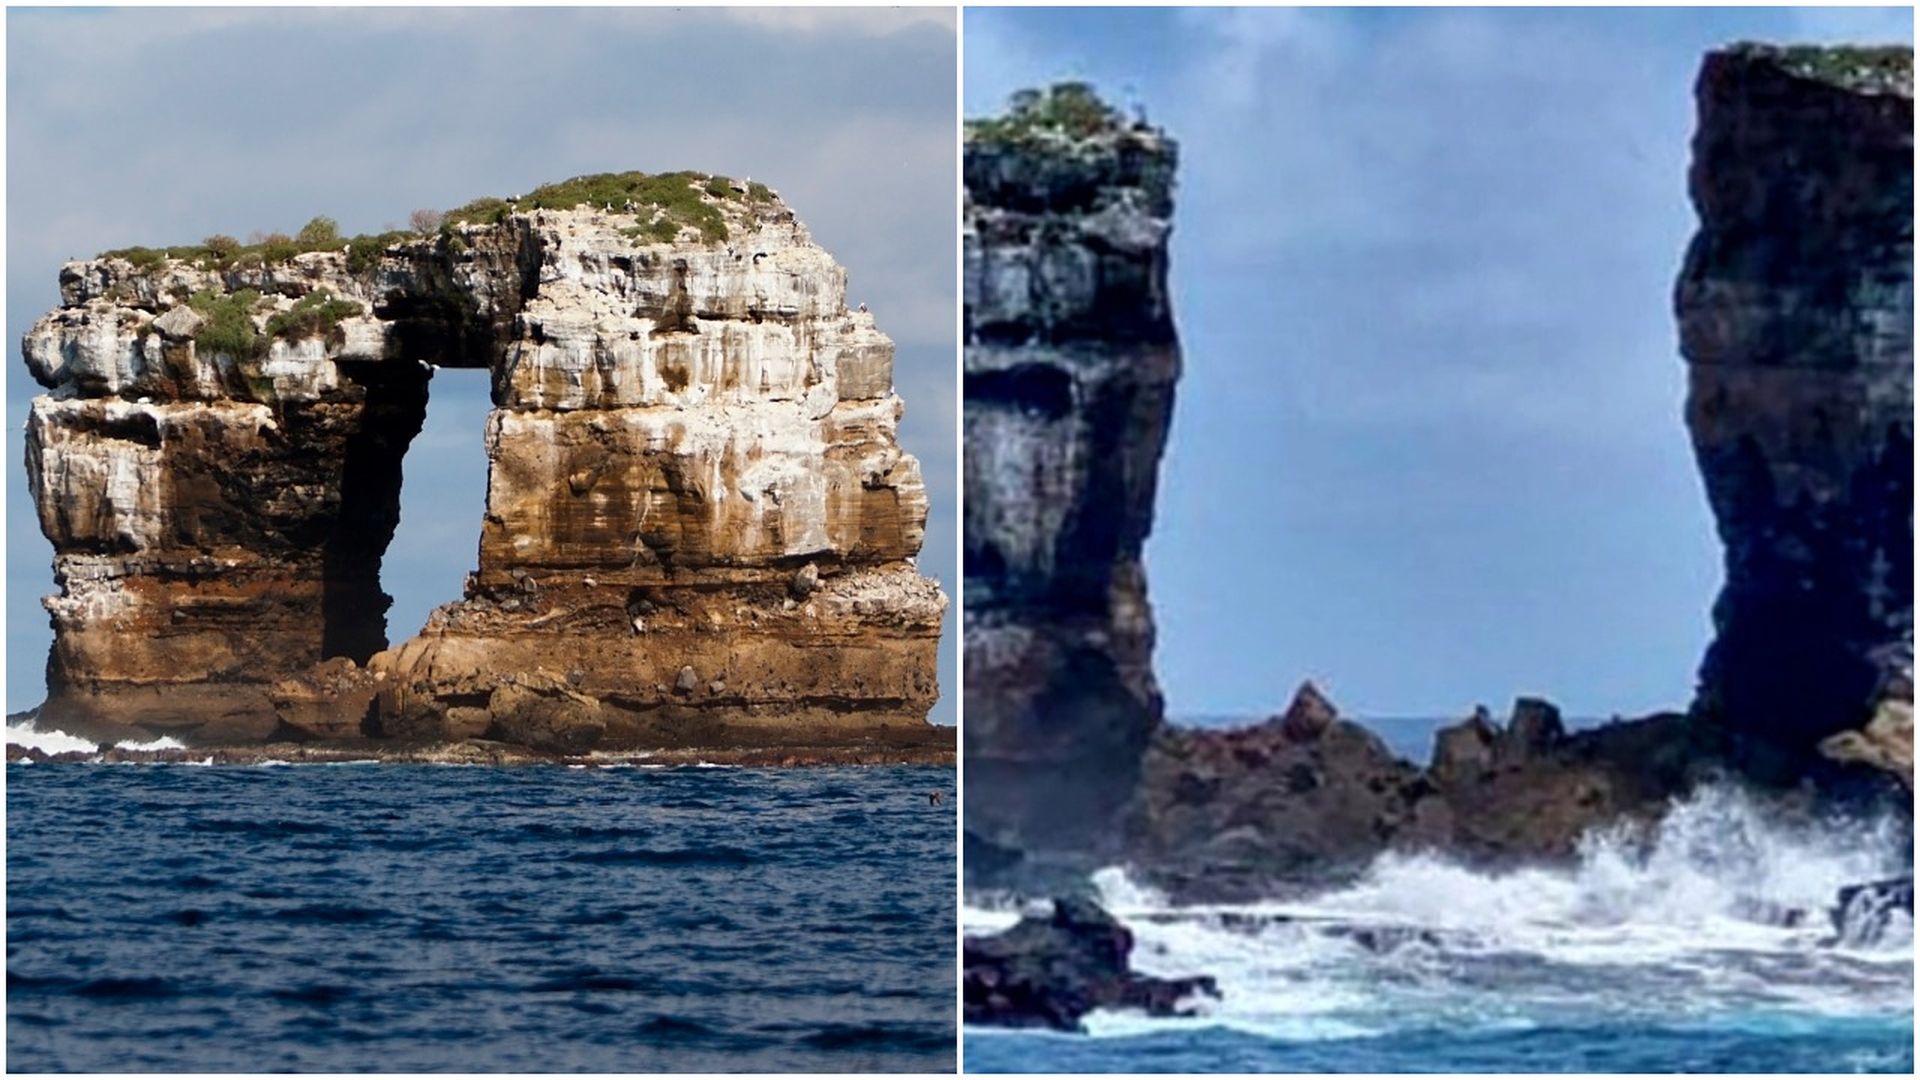 Images of Darwin's Arch before and after the collapse in the Galápagos Islands, near Ecuador. Photo: Reinhard Dirscherl\ullstein bild via Getty Images